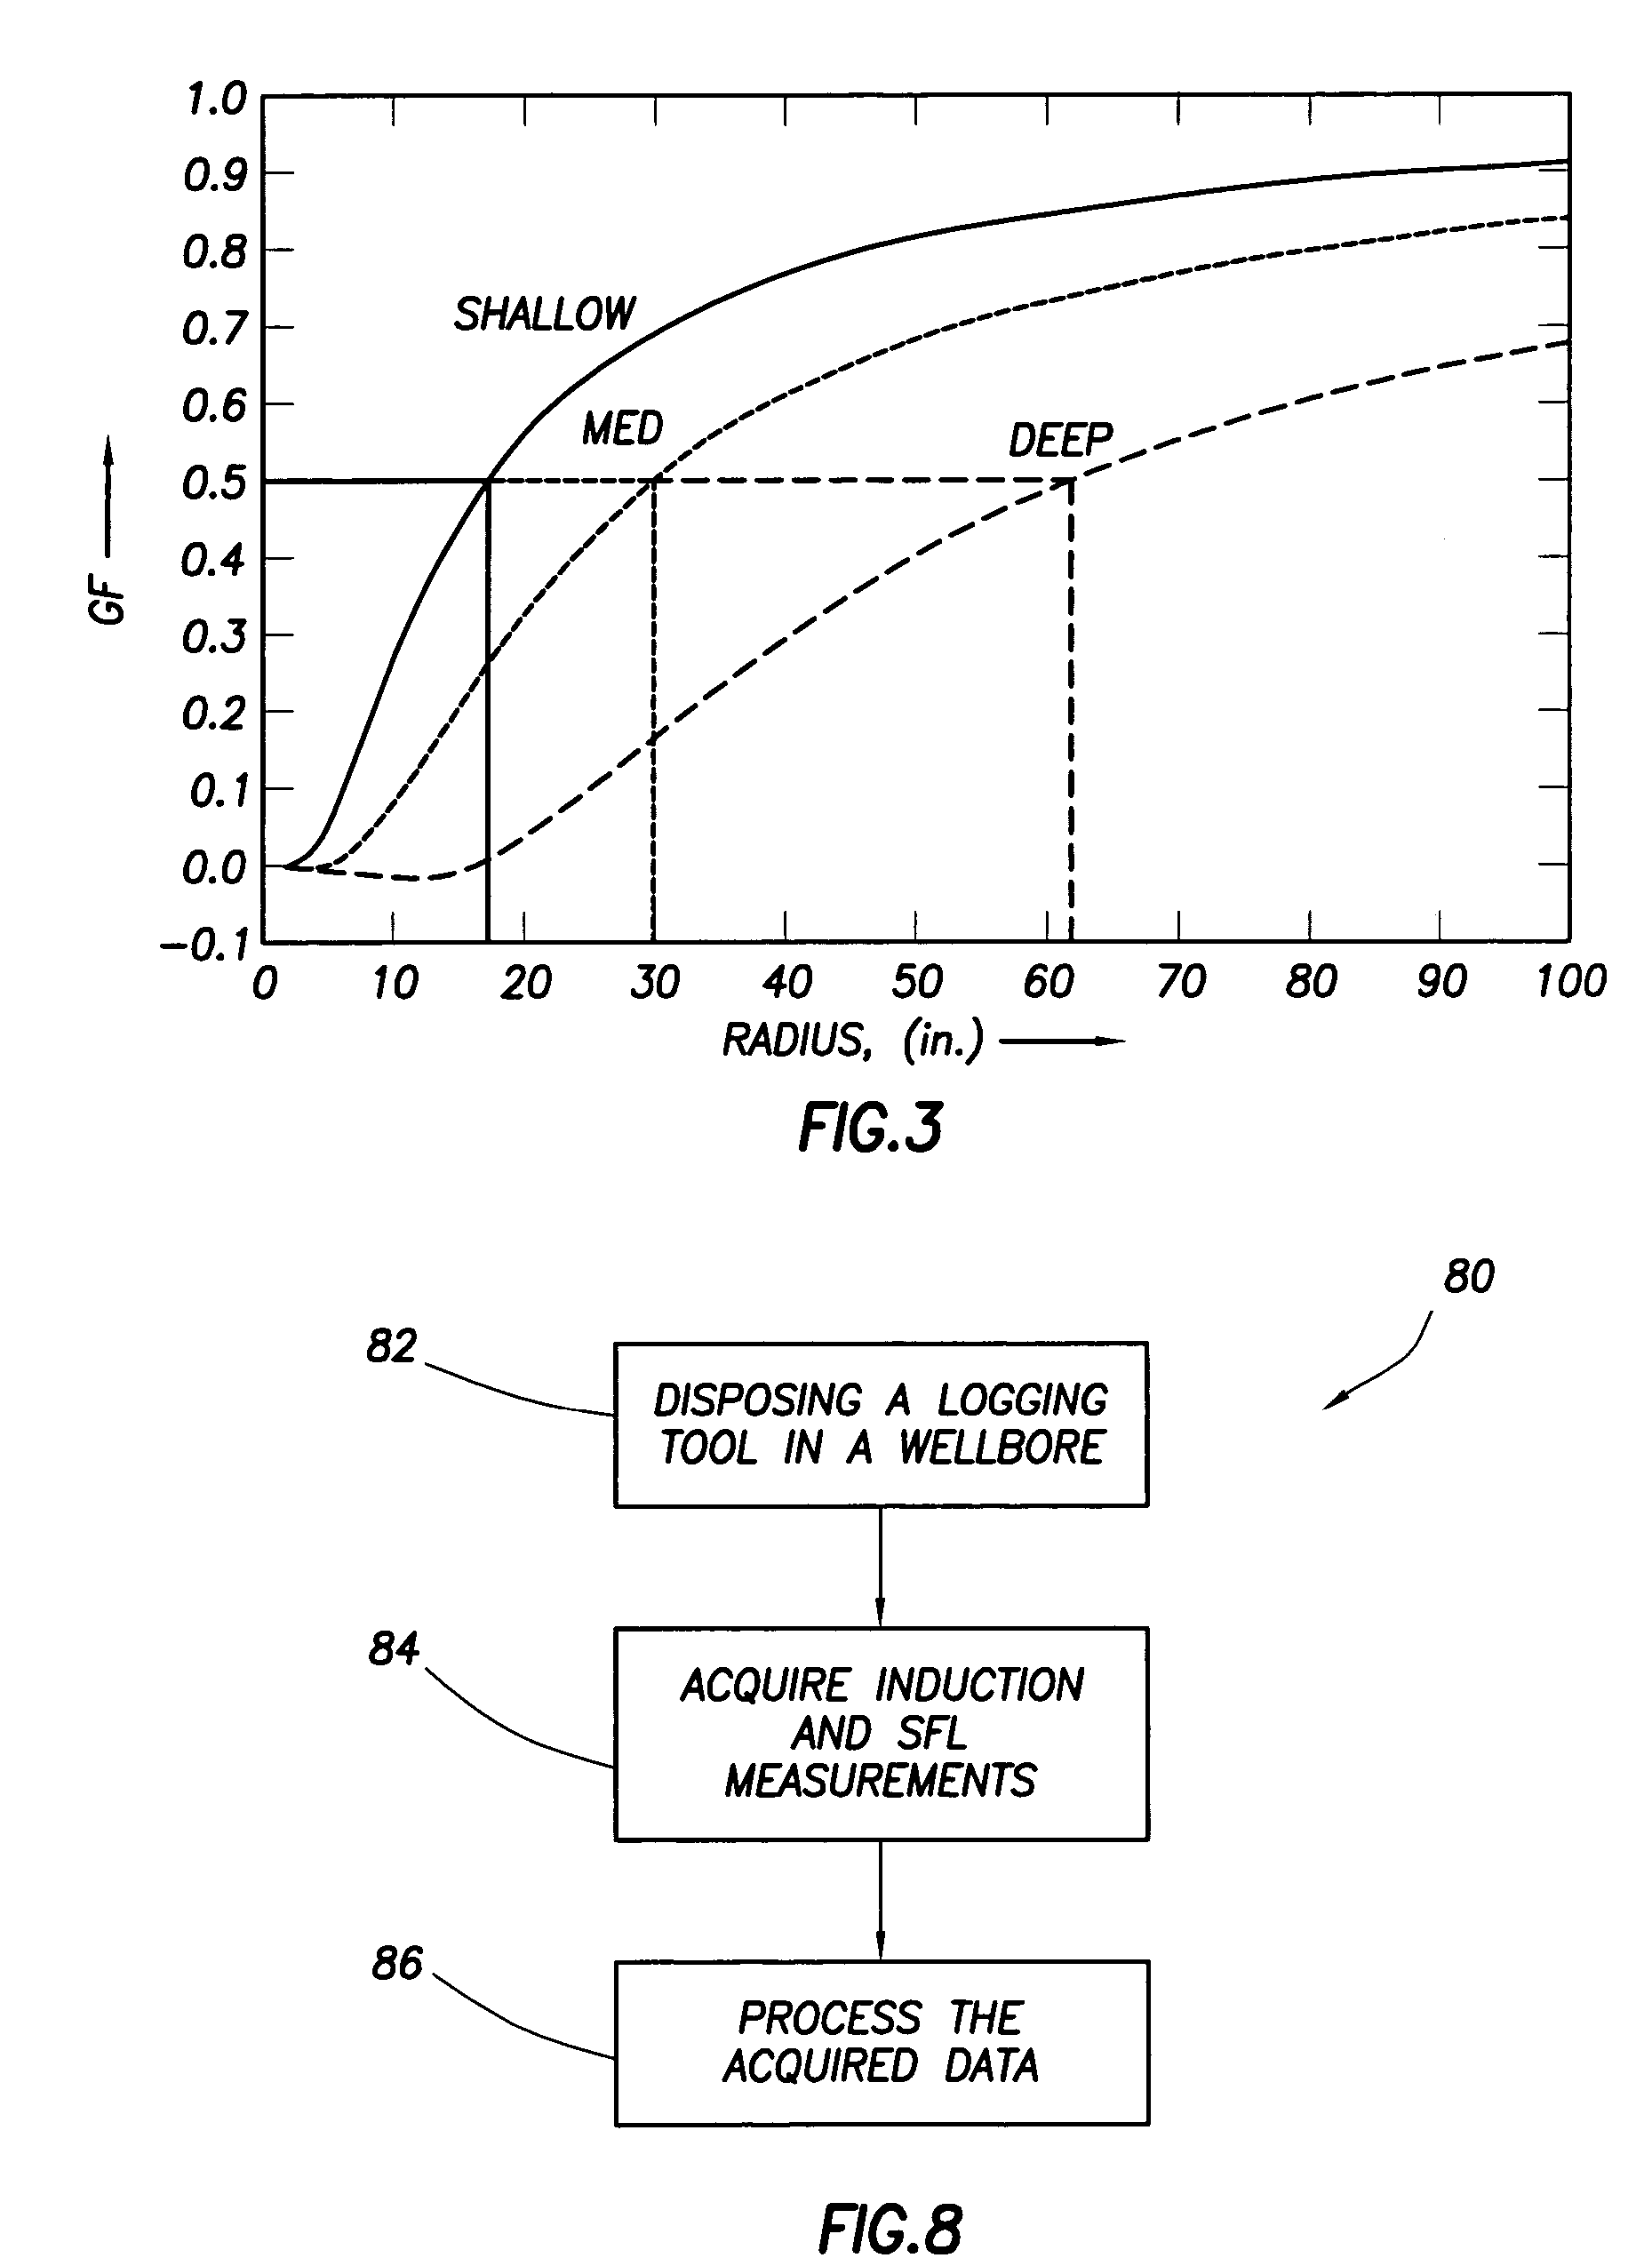 Apparatus and methods for induction-SFL logging